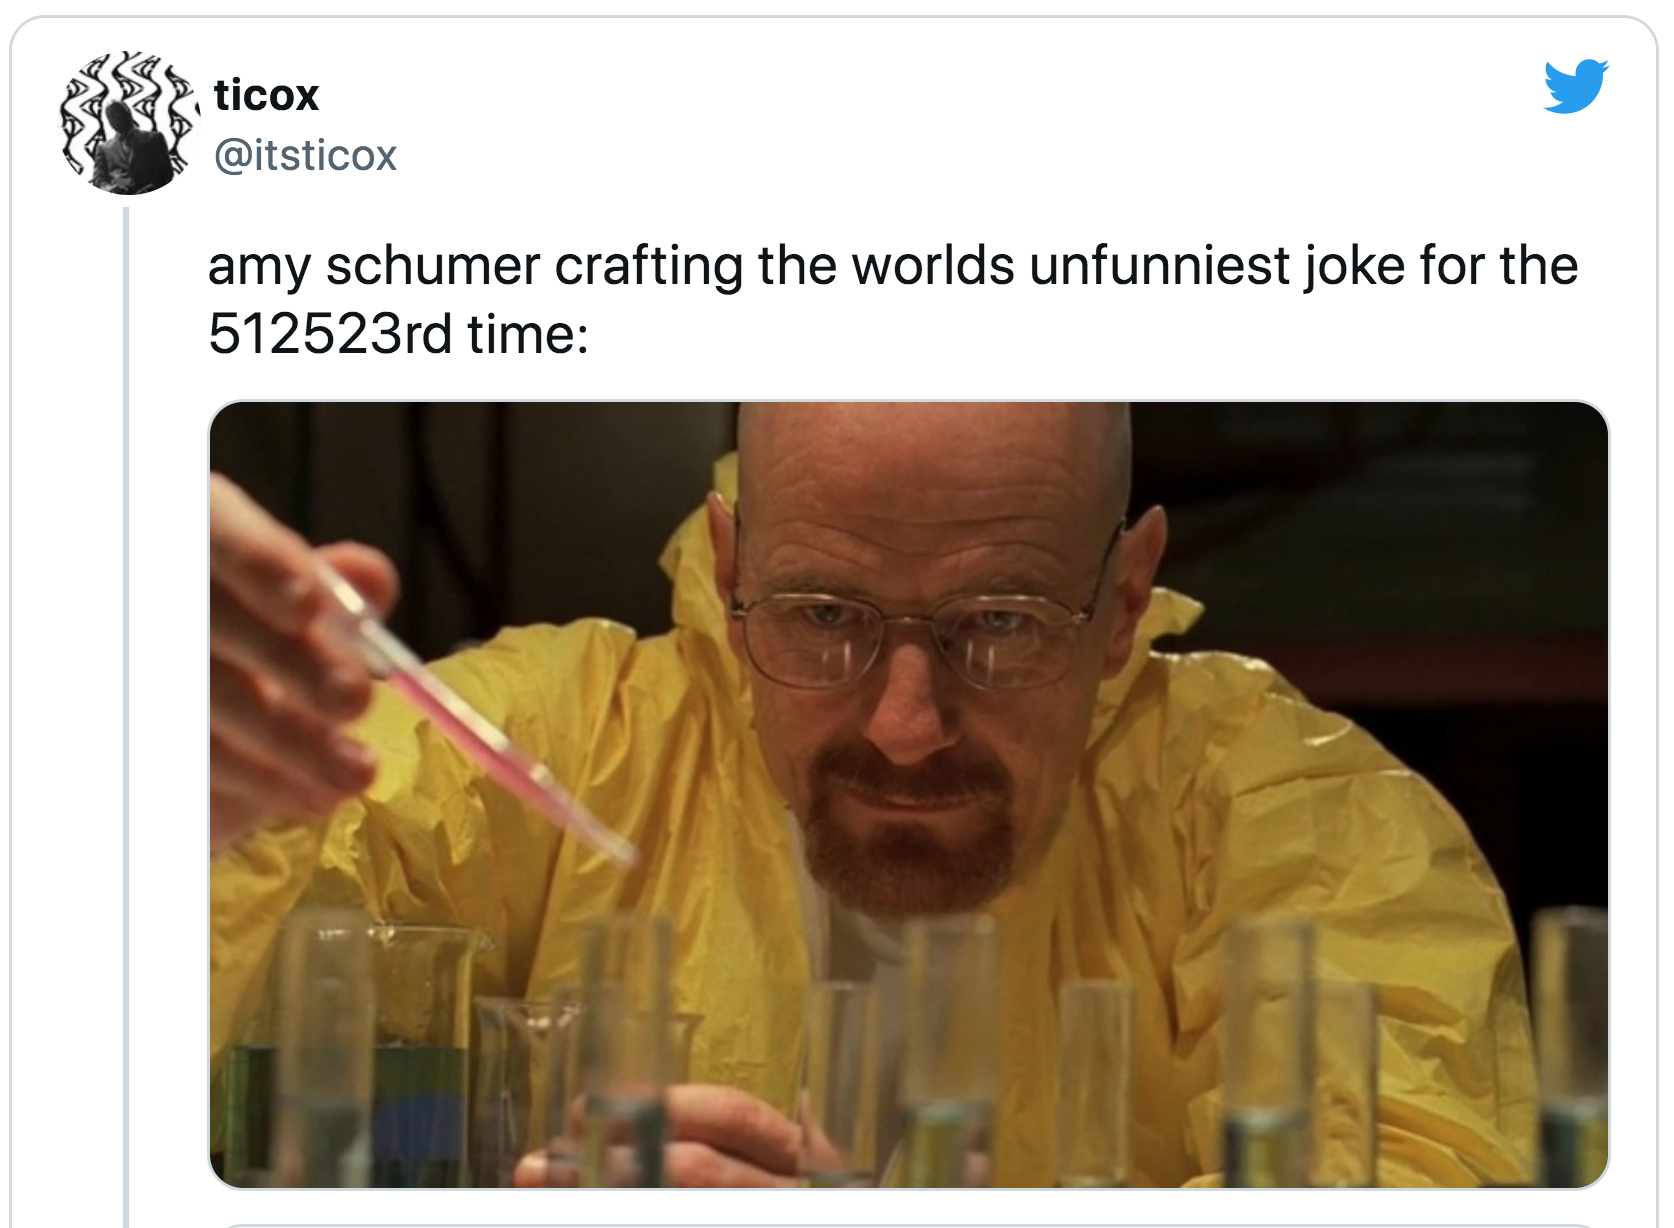 Amy Schumer Oscars Joke - carefully crafting meme - ticox amy schumer crafting the worlds unfunniest joke for the 512523rd time